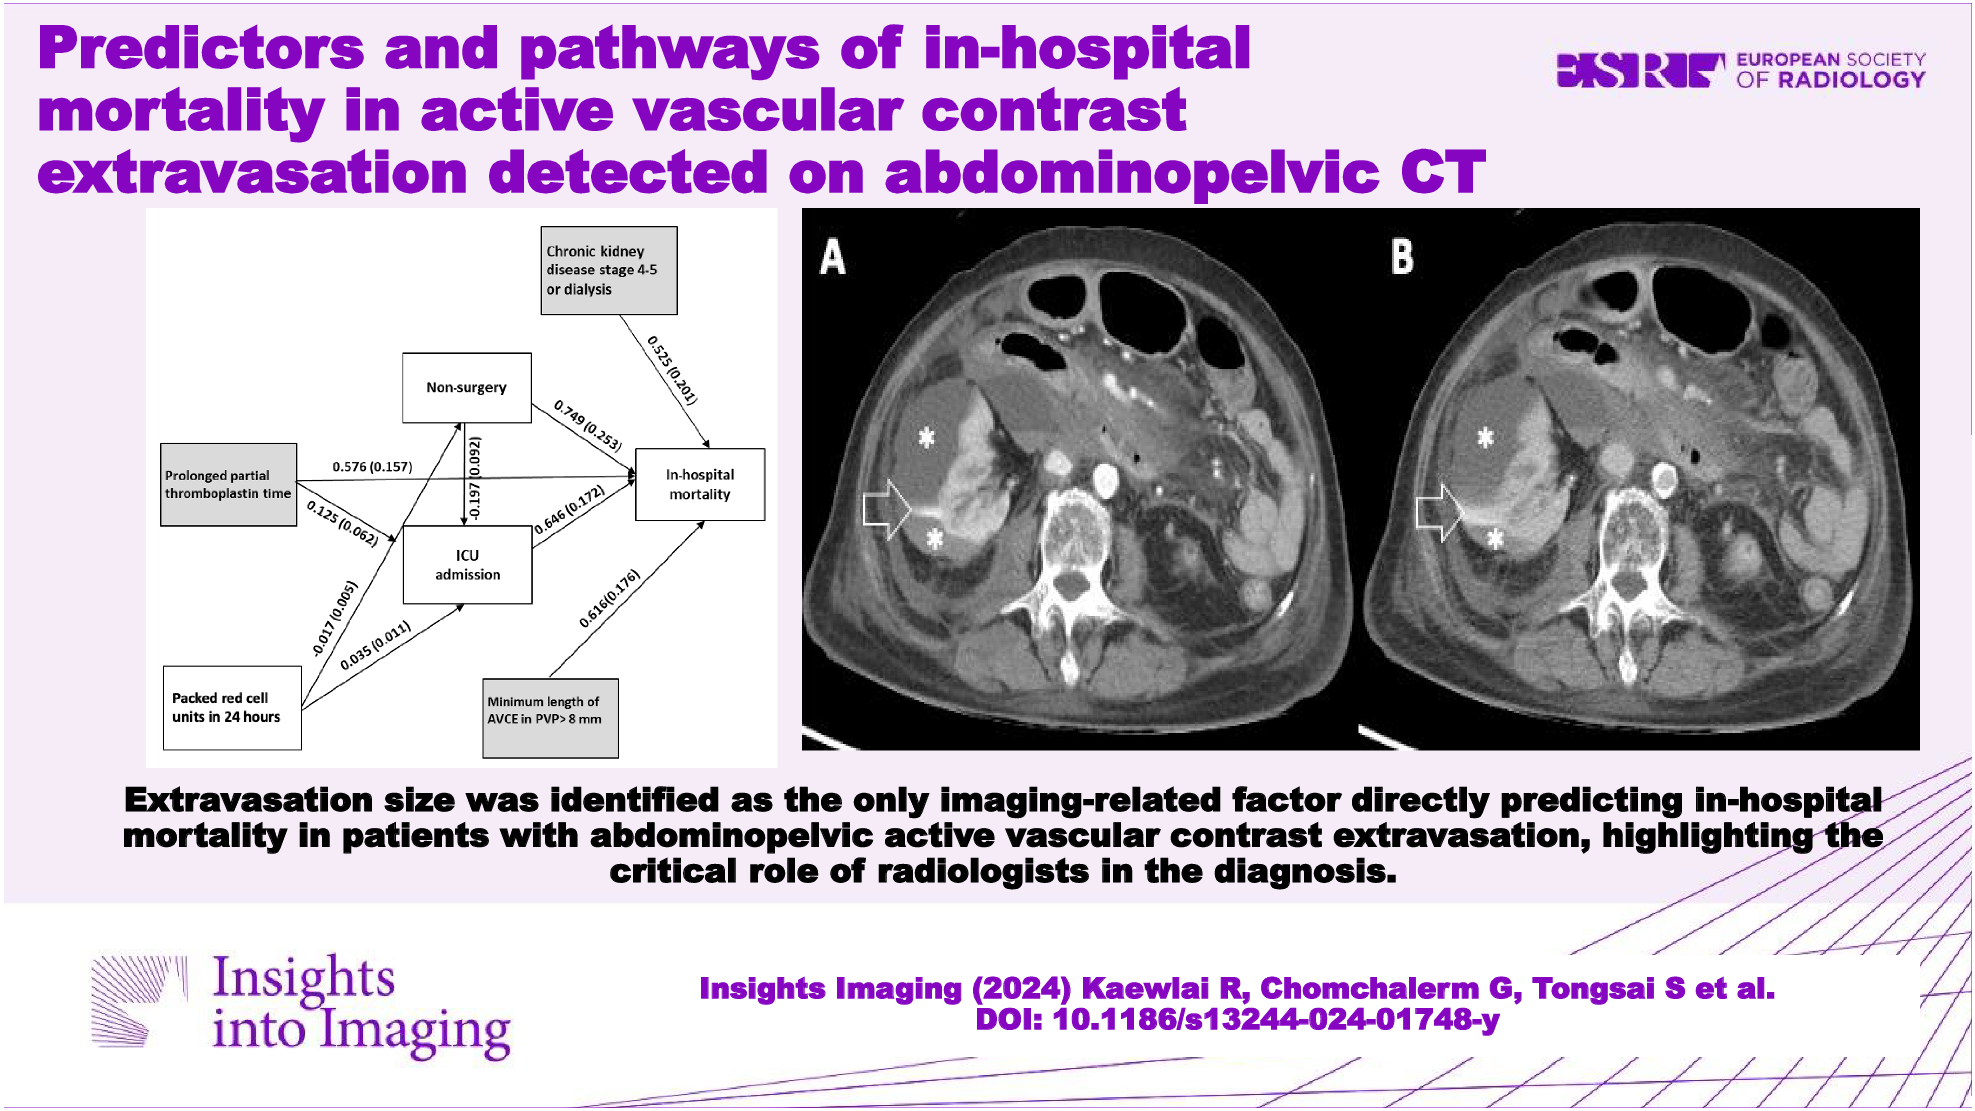 Predictors and pathways of in-hospital mortality in active vascular contrast extravasation detected on abdominopelvic CT